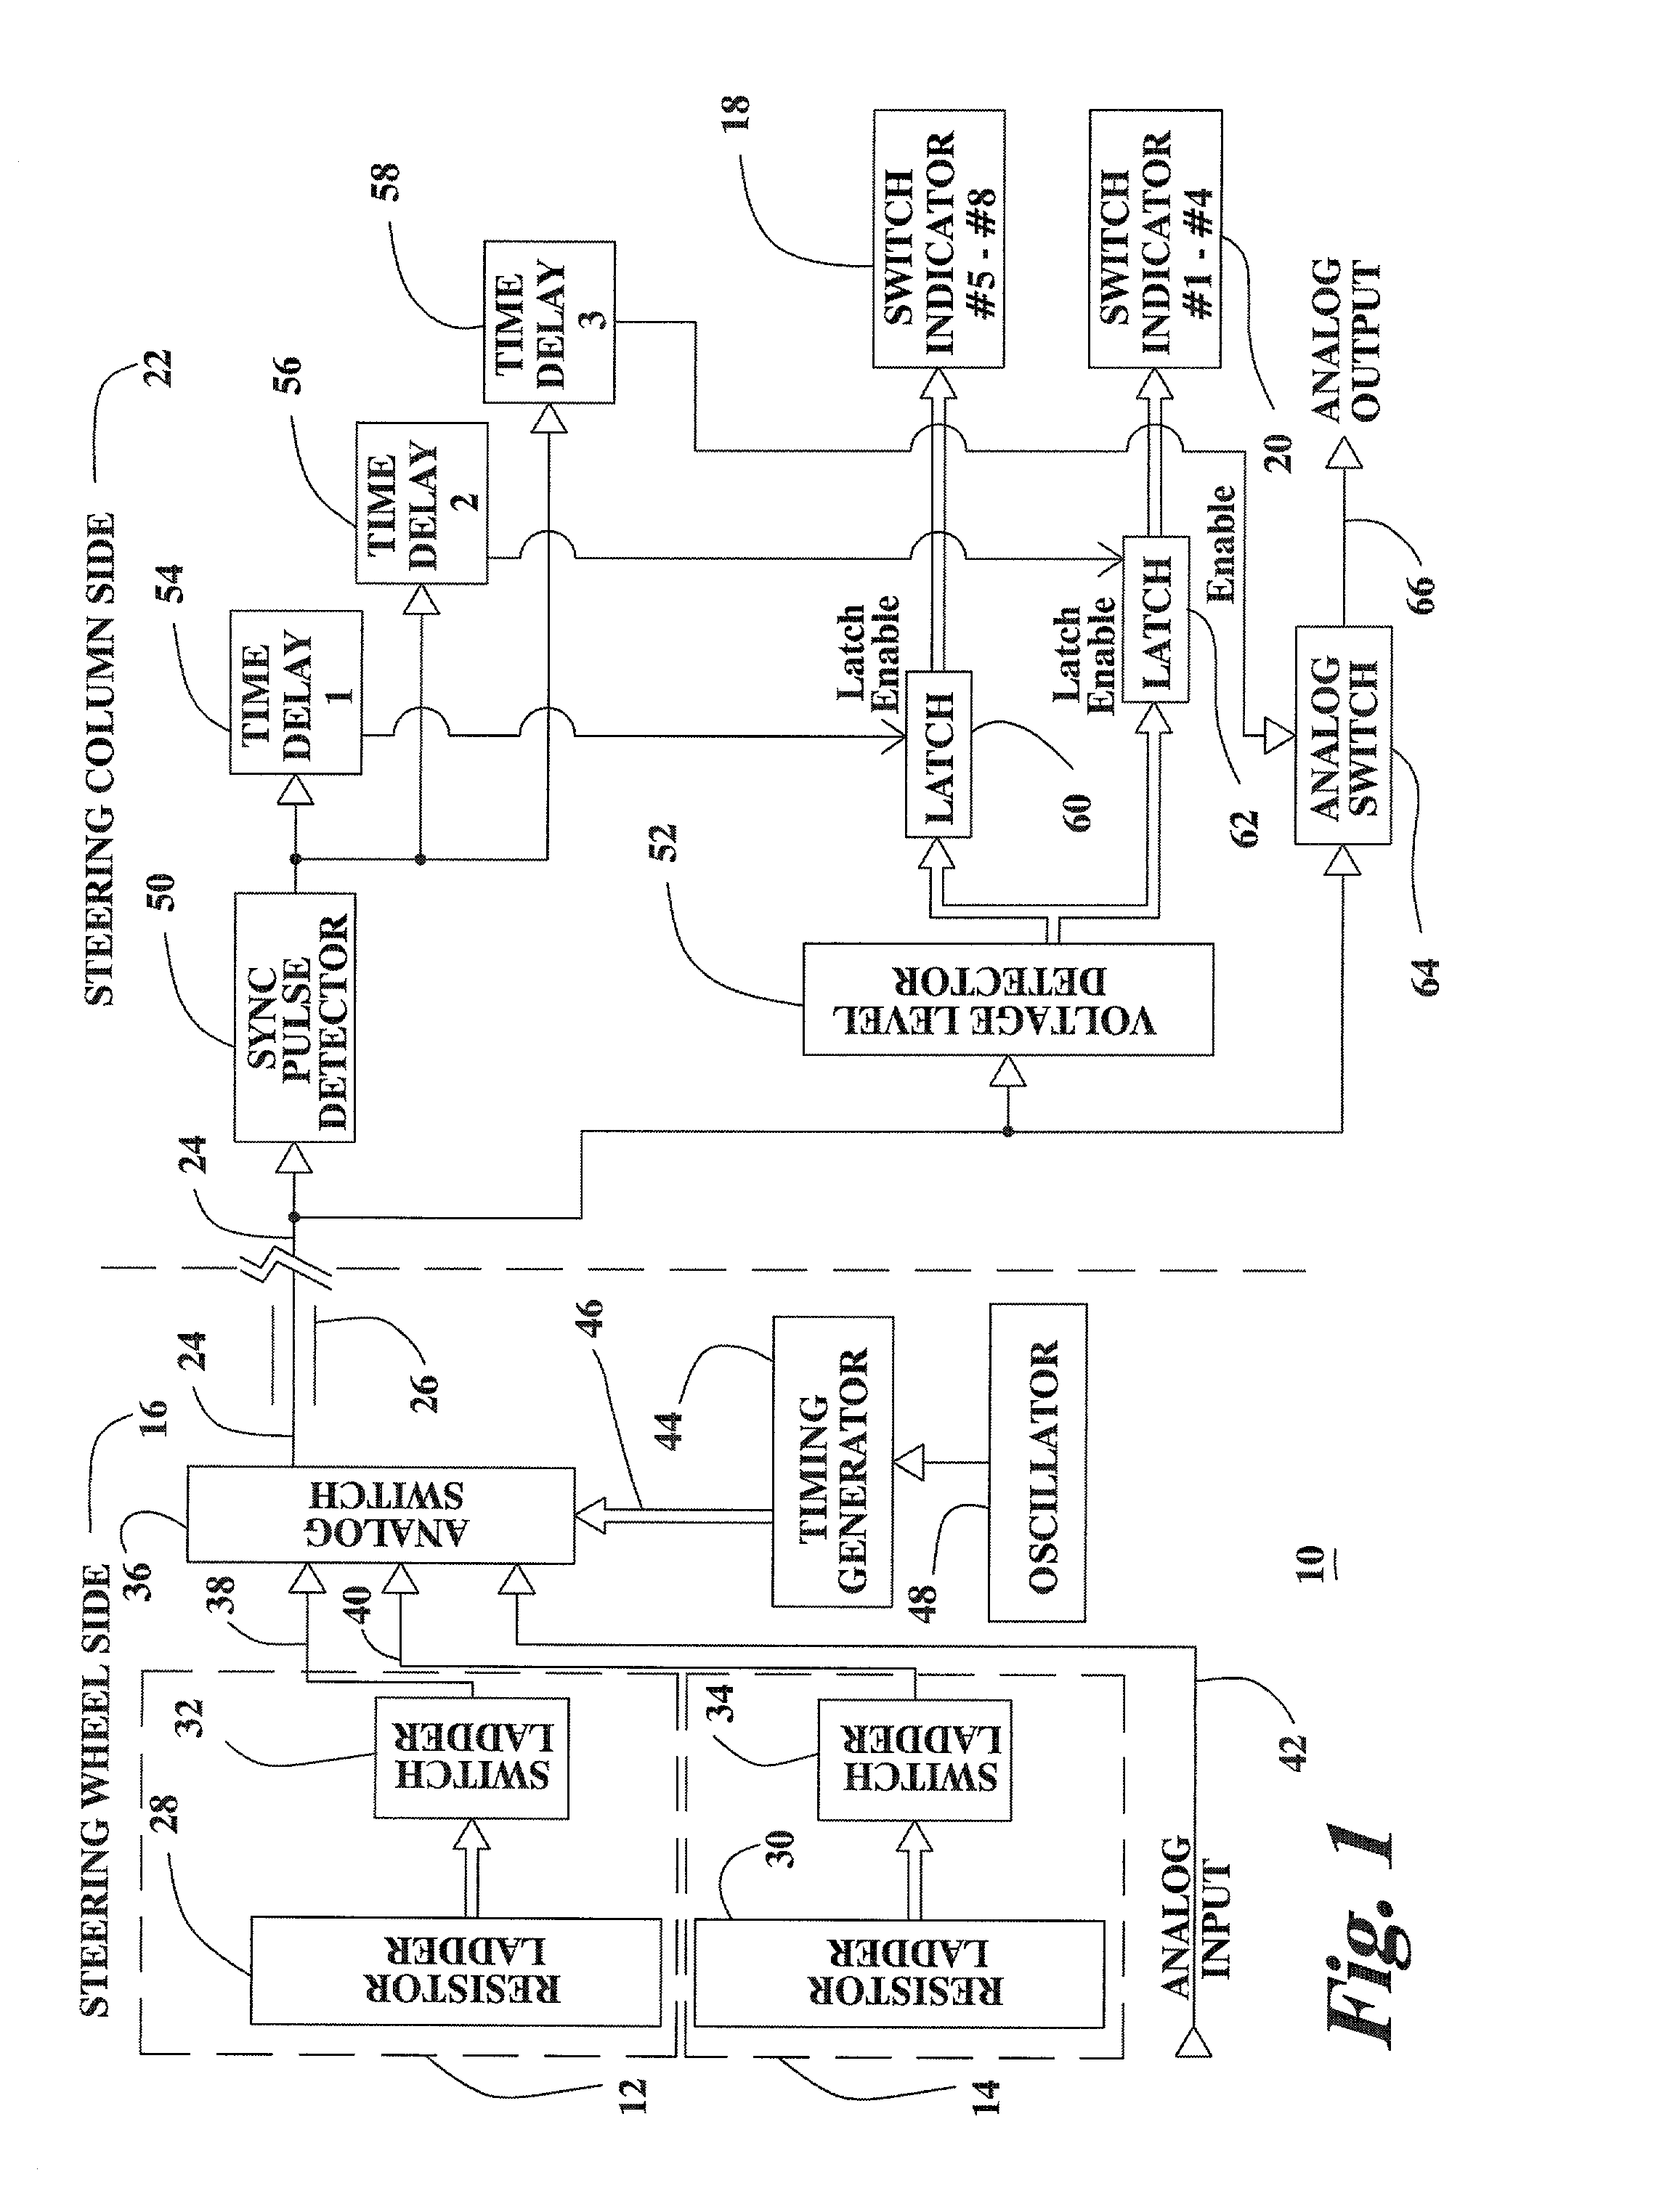 Multiple input multiplexing connection apparatus and method